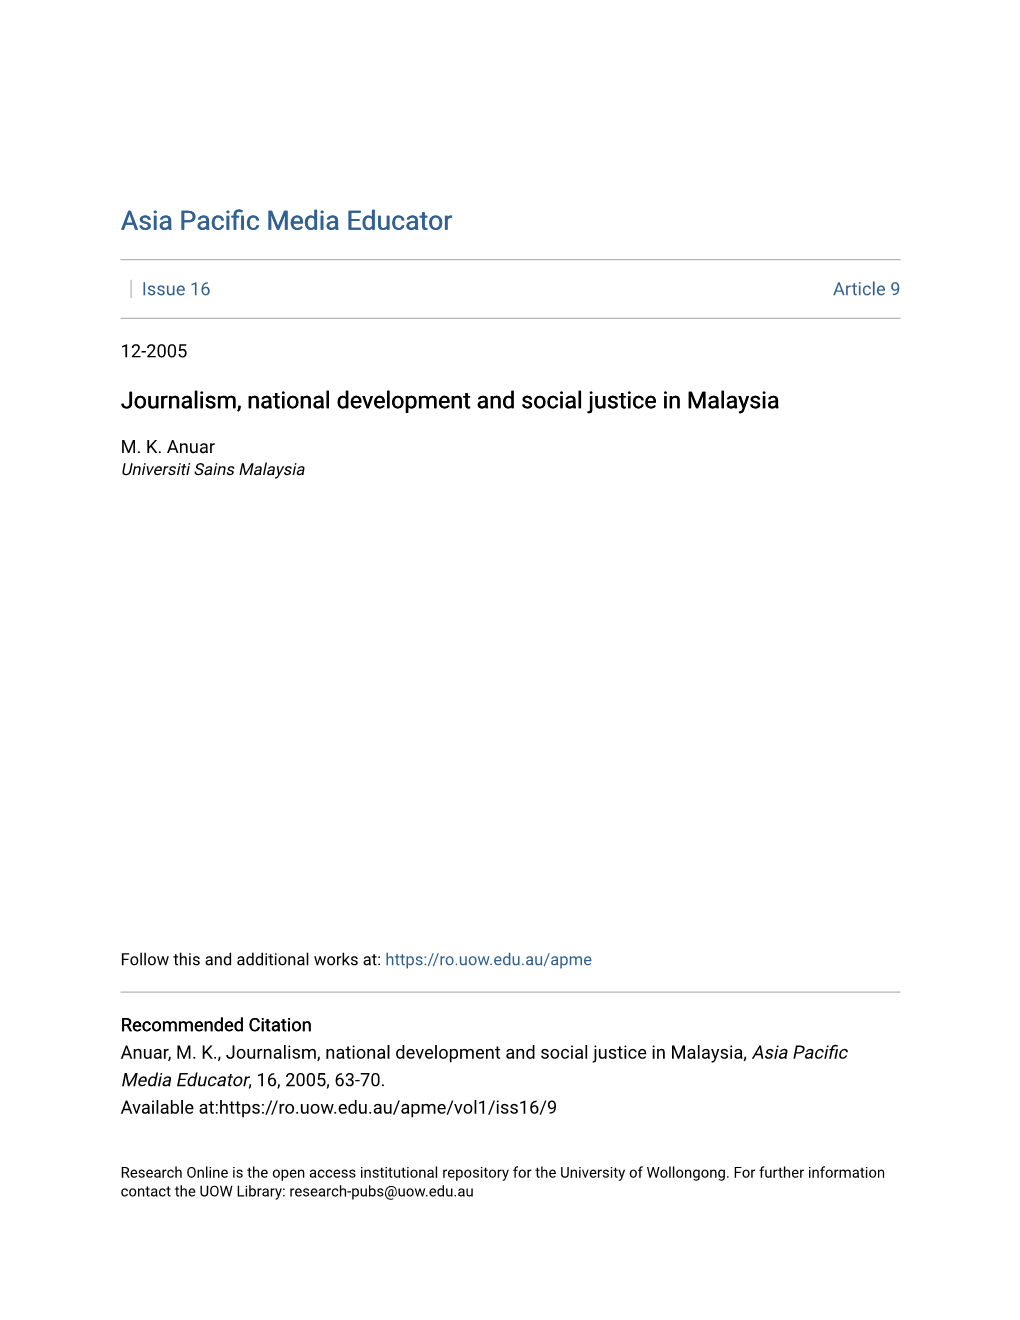 Journalism, National Development and Social Justice in Malaysia